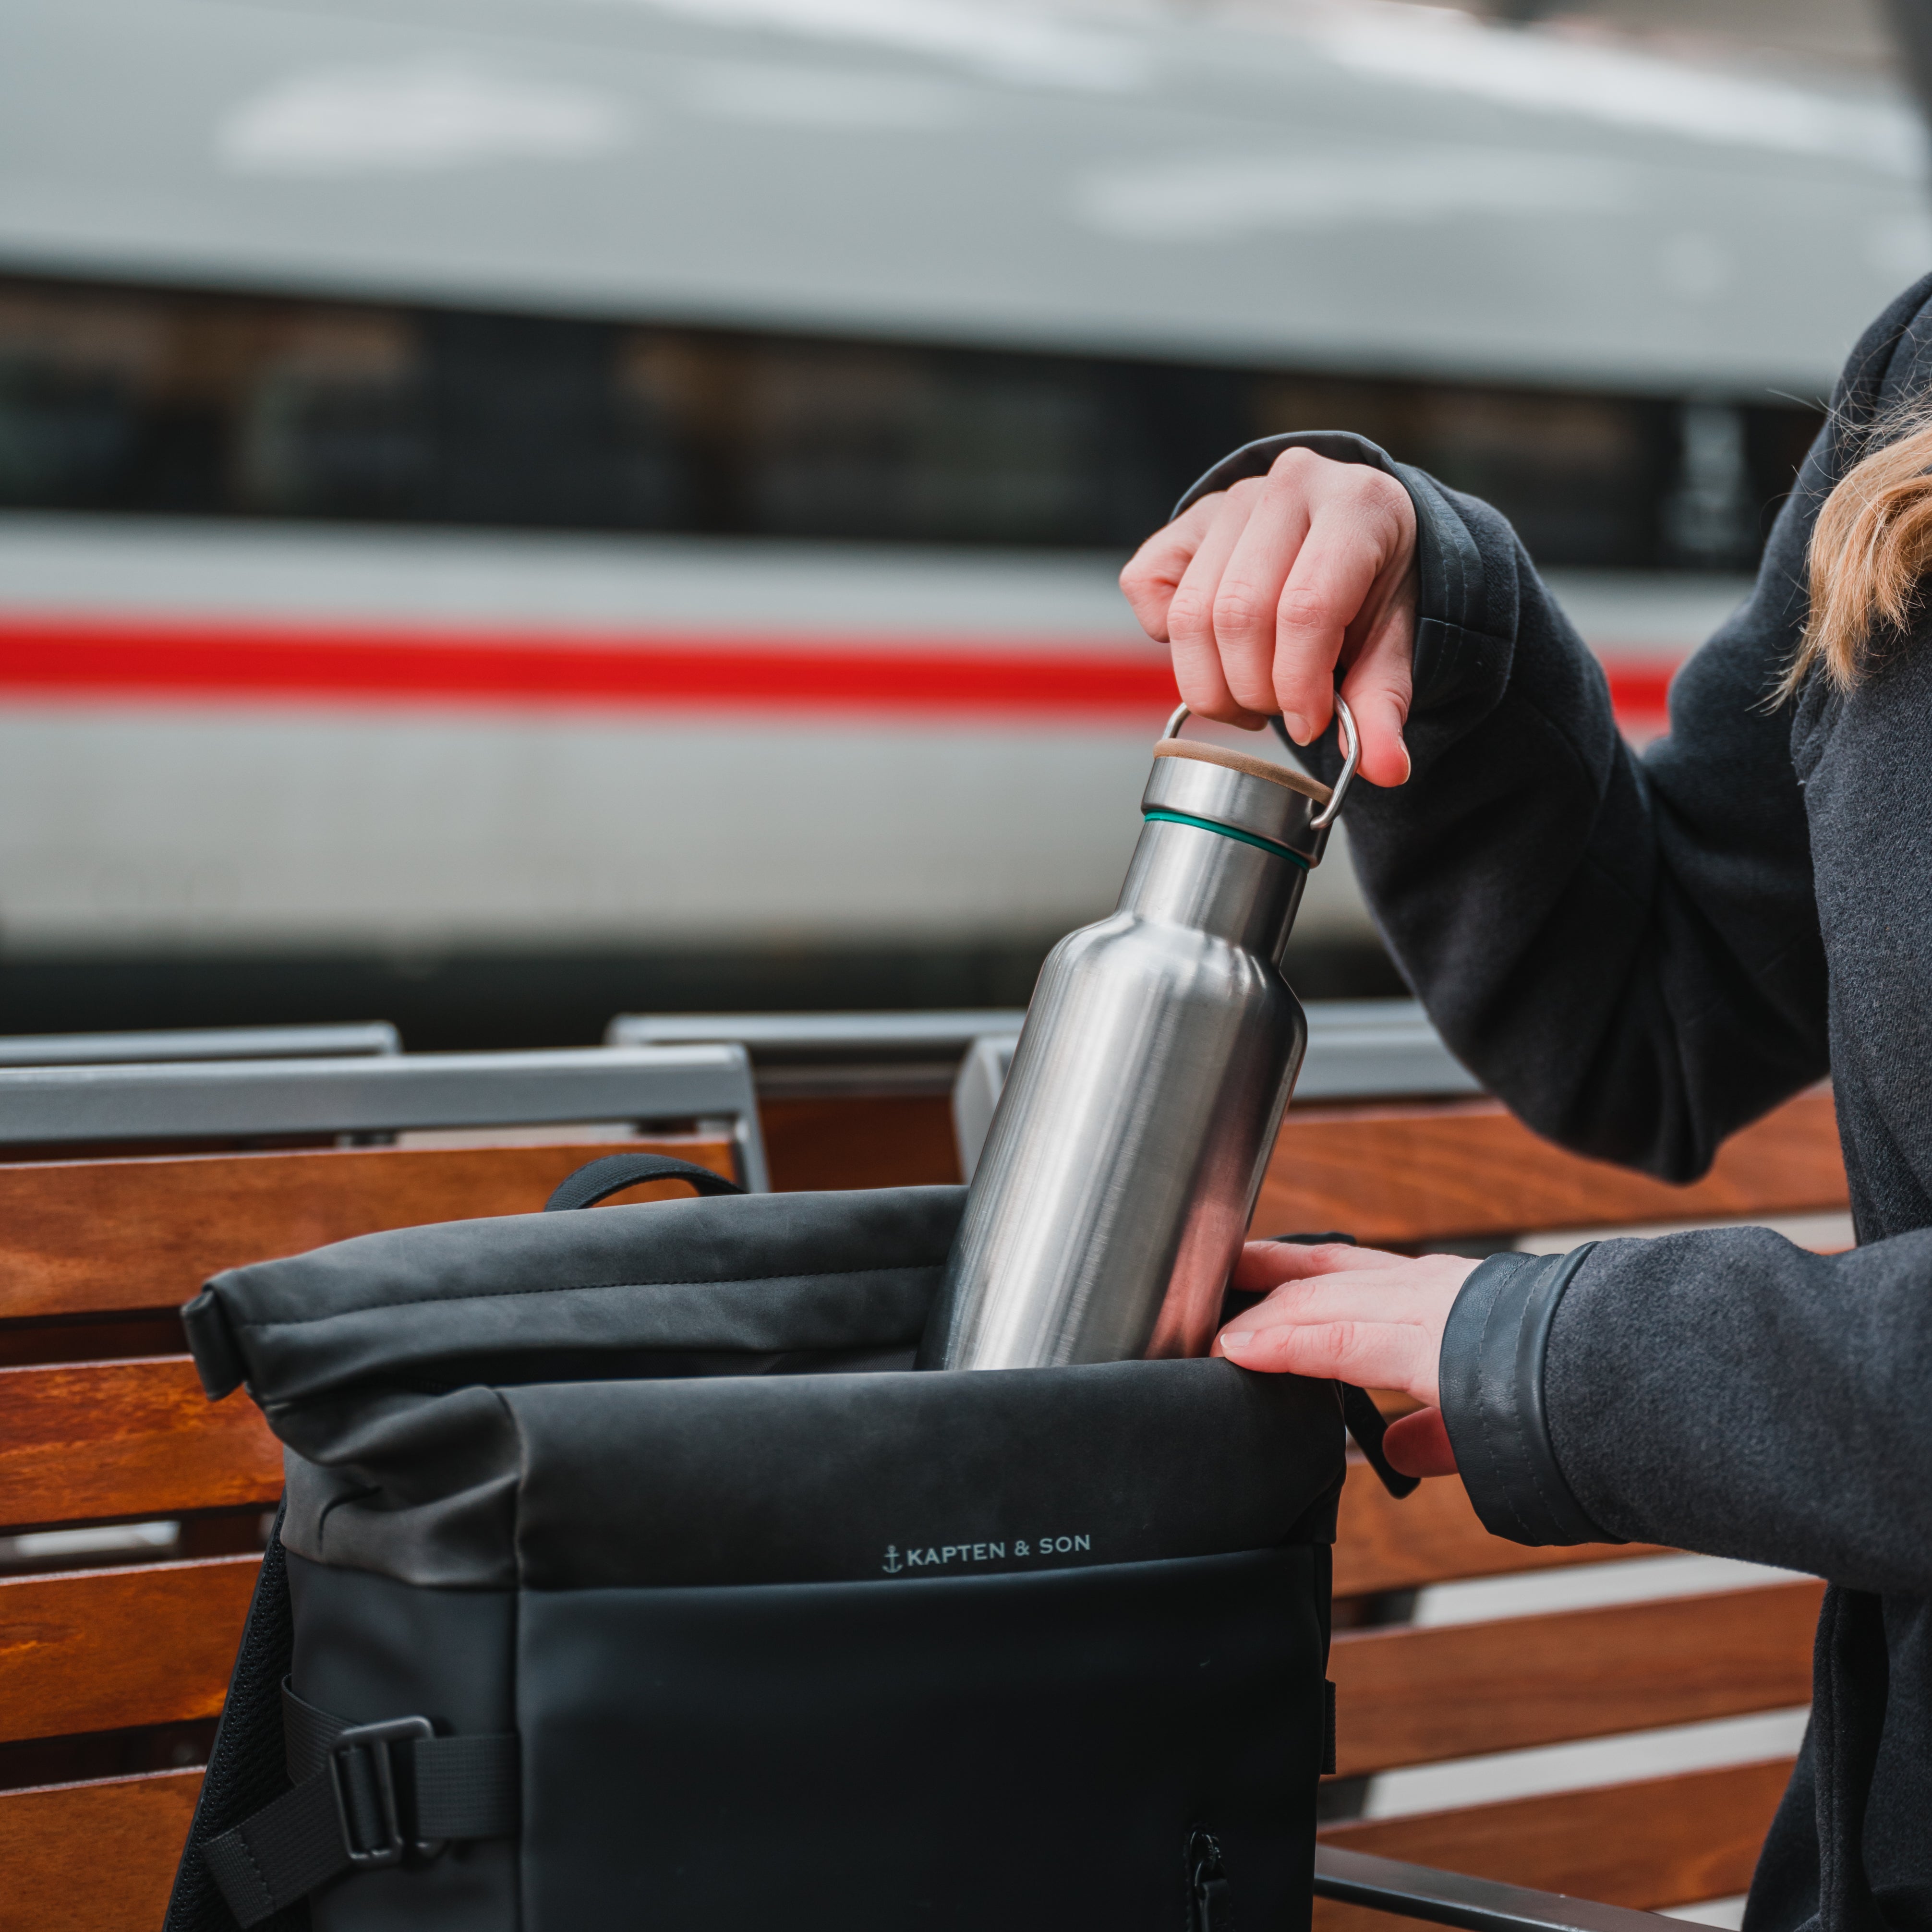 Blockhuette stainless steelwater bottle being packed into a backpack by agirl